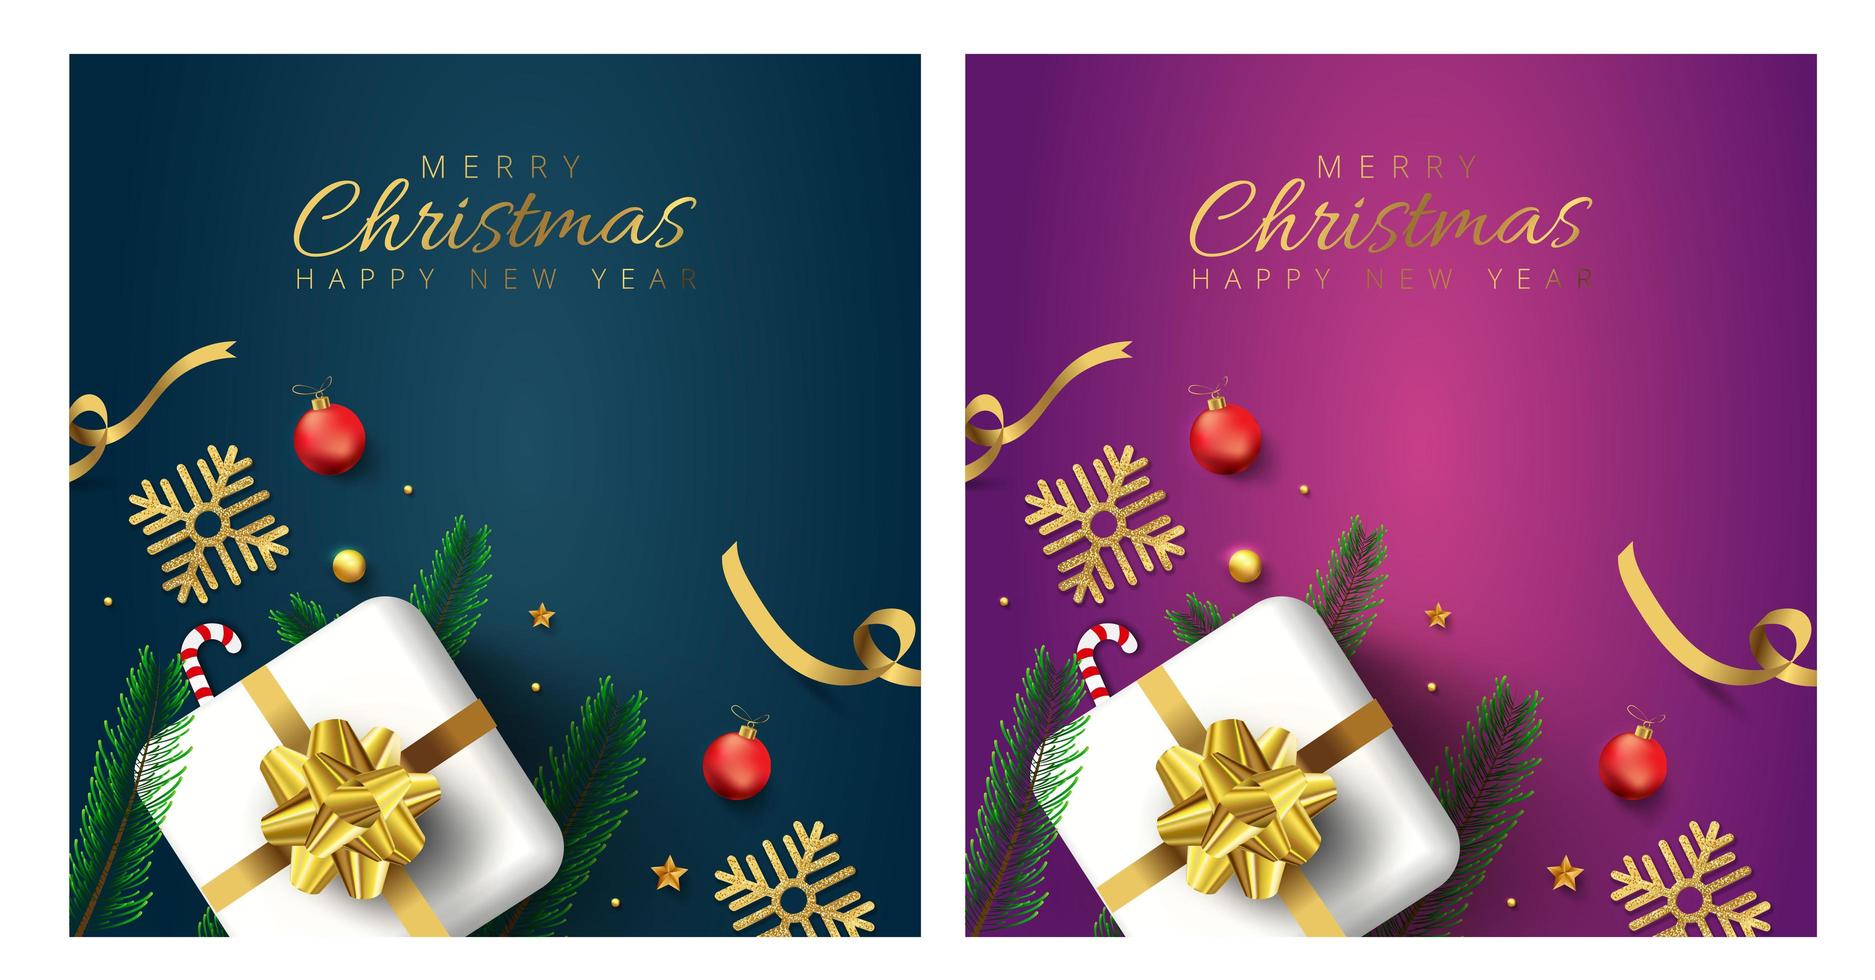 Merry Christmas cards with stars, branches and gifts vector